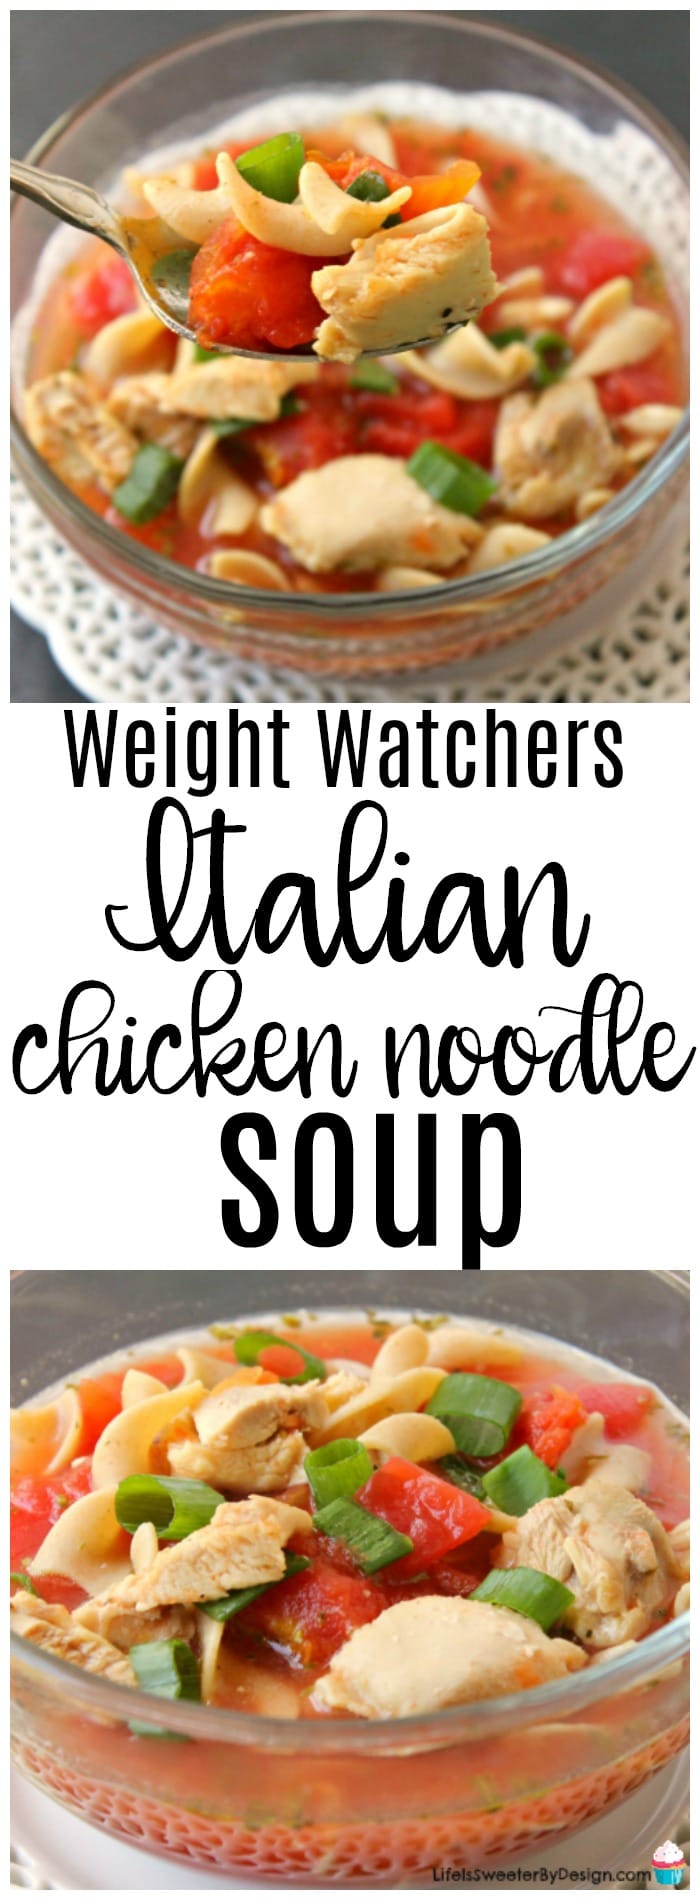 Weight Watchers Italian Chicken Noodle Soup recipe is filling and delicious plus only 5 SmartPoints per cup! This Weight Watchers dinner recipe is comfort food in a bowl plus EASY and healthy!